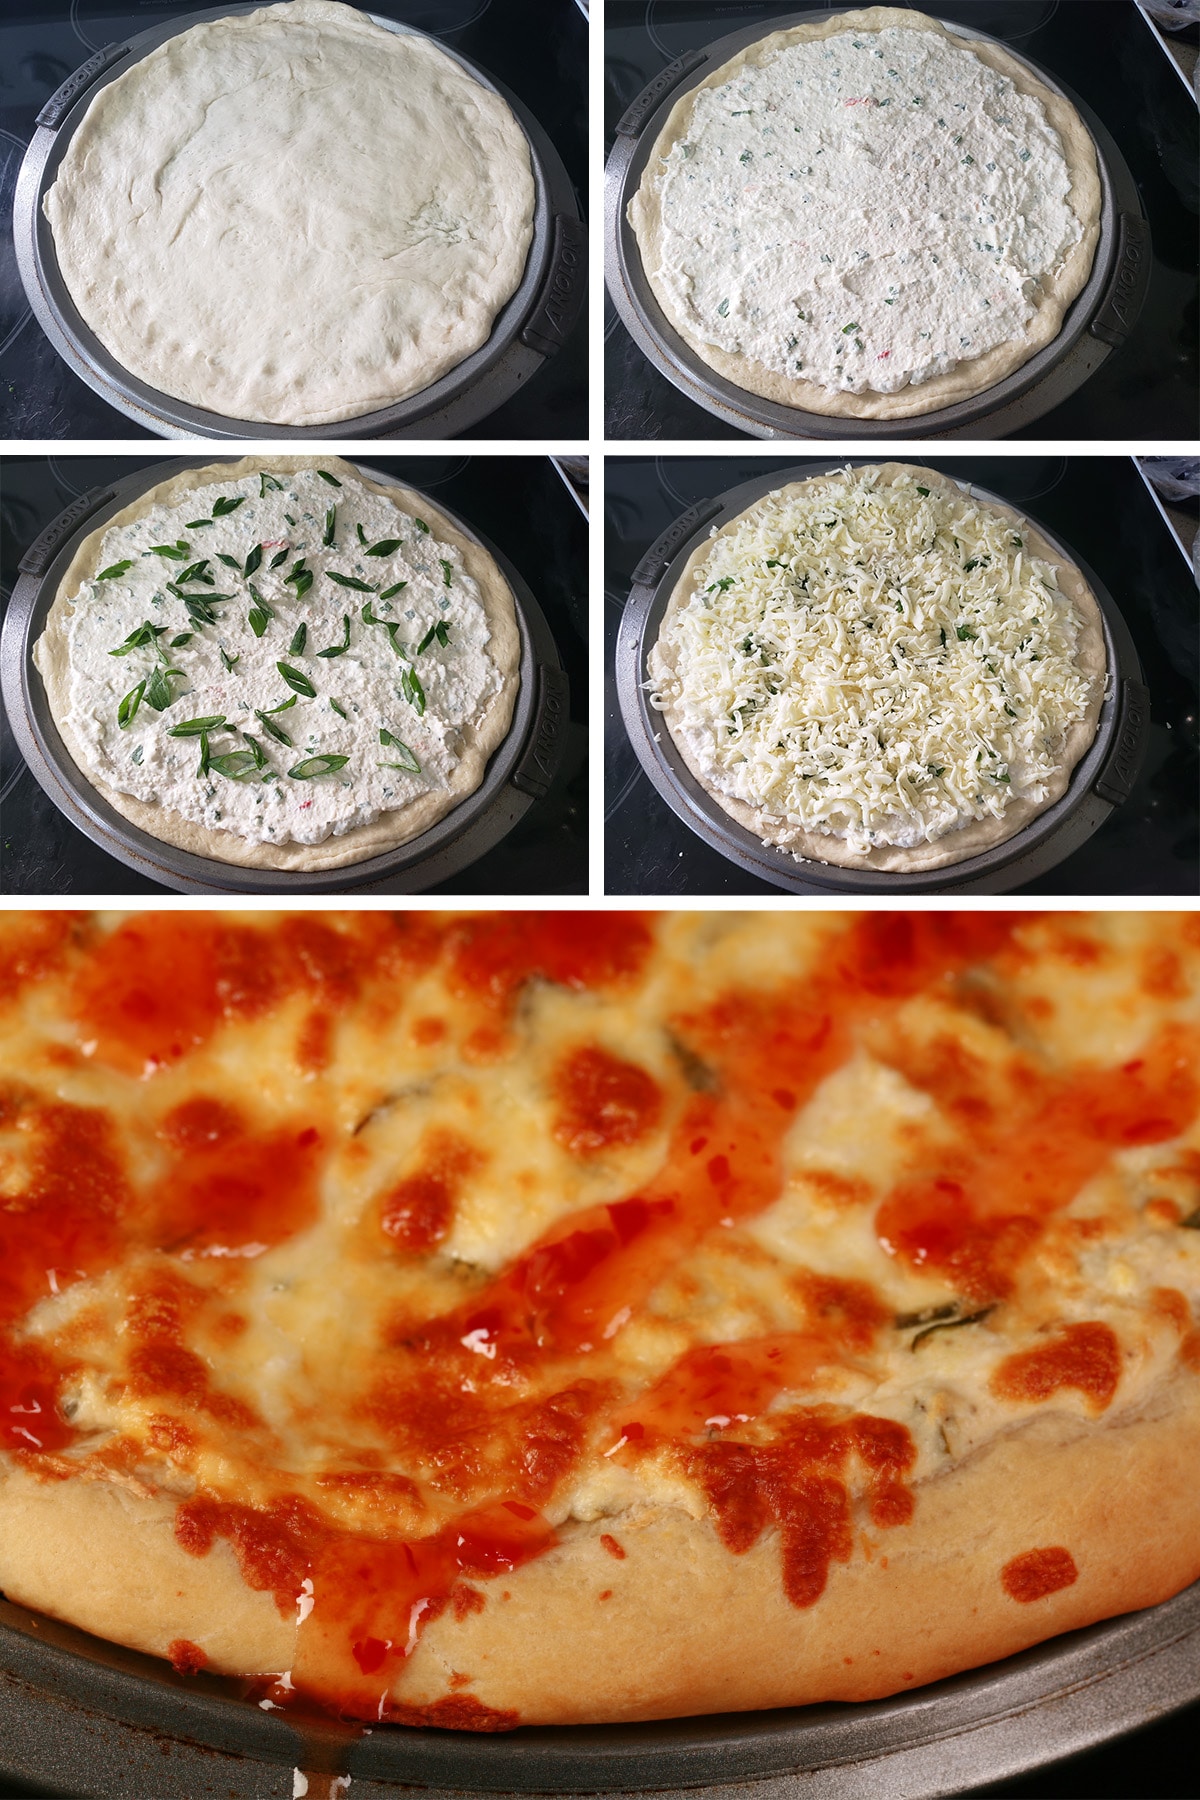 A 5 part image showing a crab rangoon pizza being assembled.